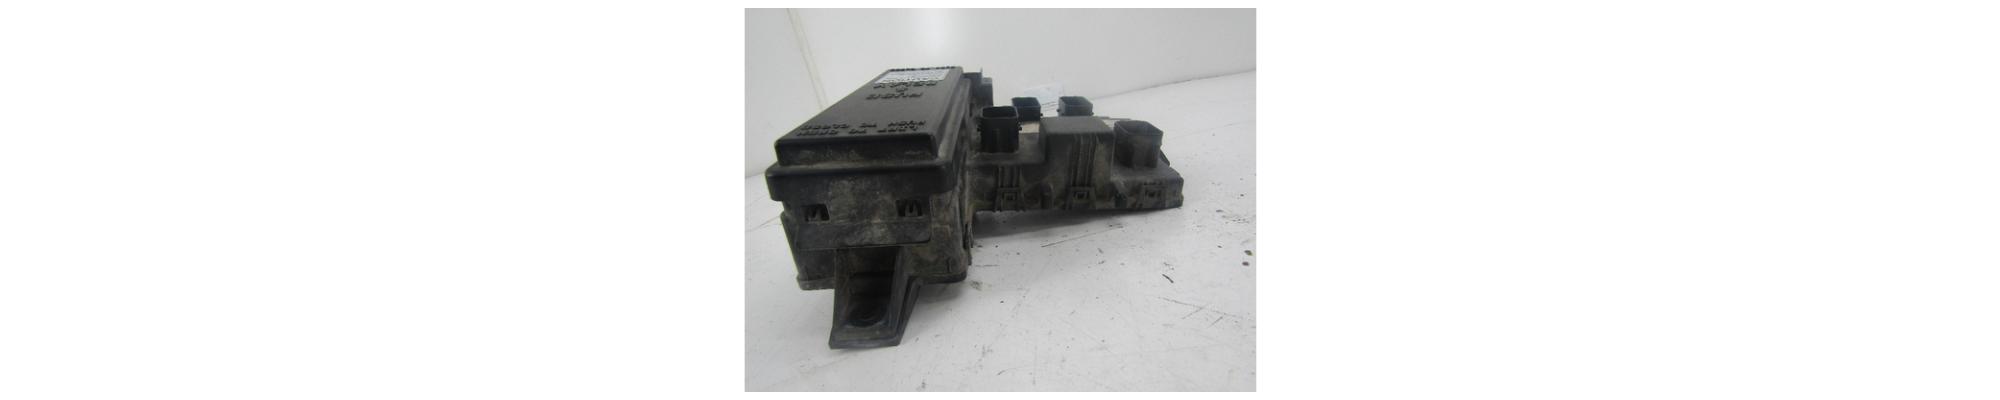 FREIGHTLINER CASCADIA Fuse Box OEM# A0675982000 in ...